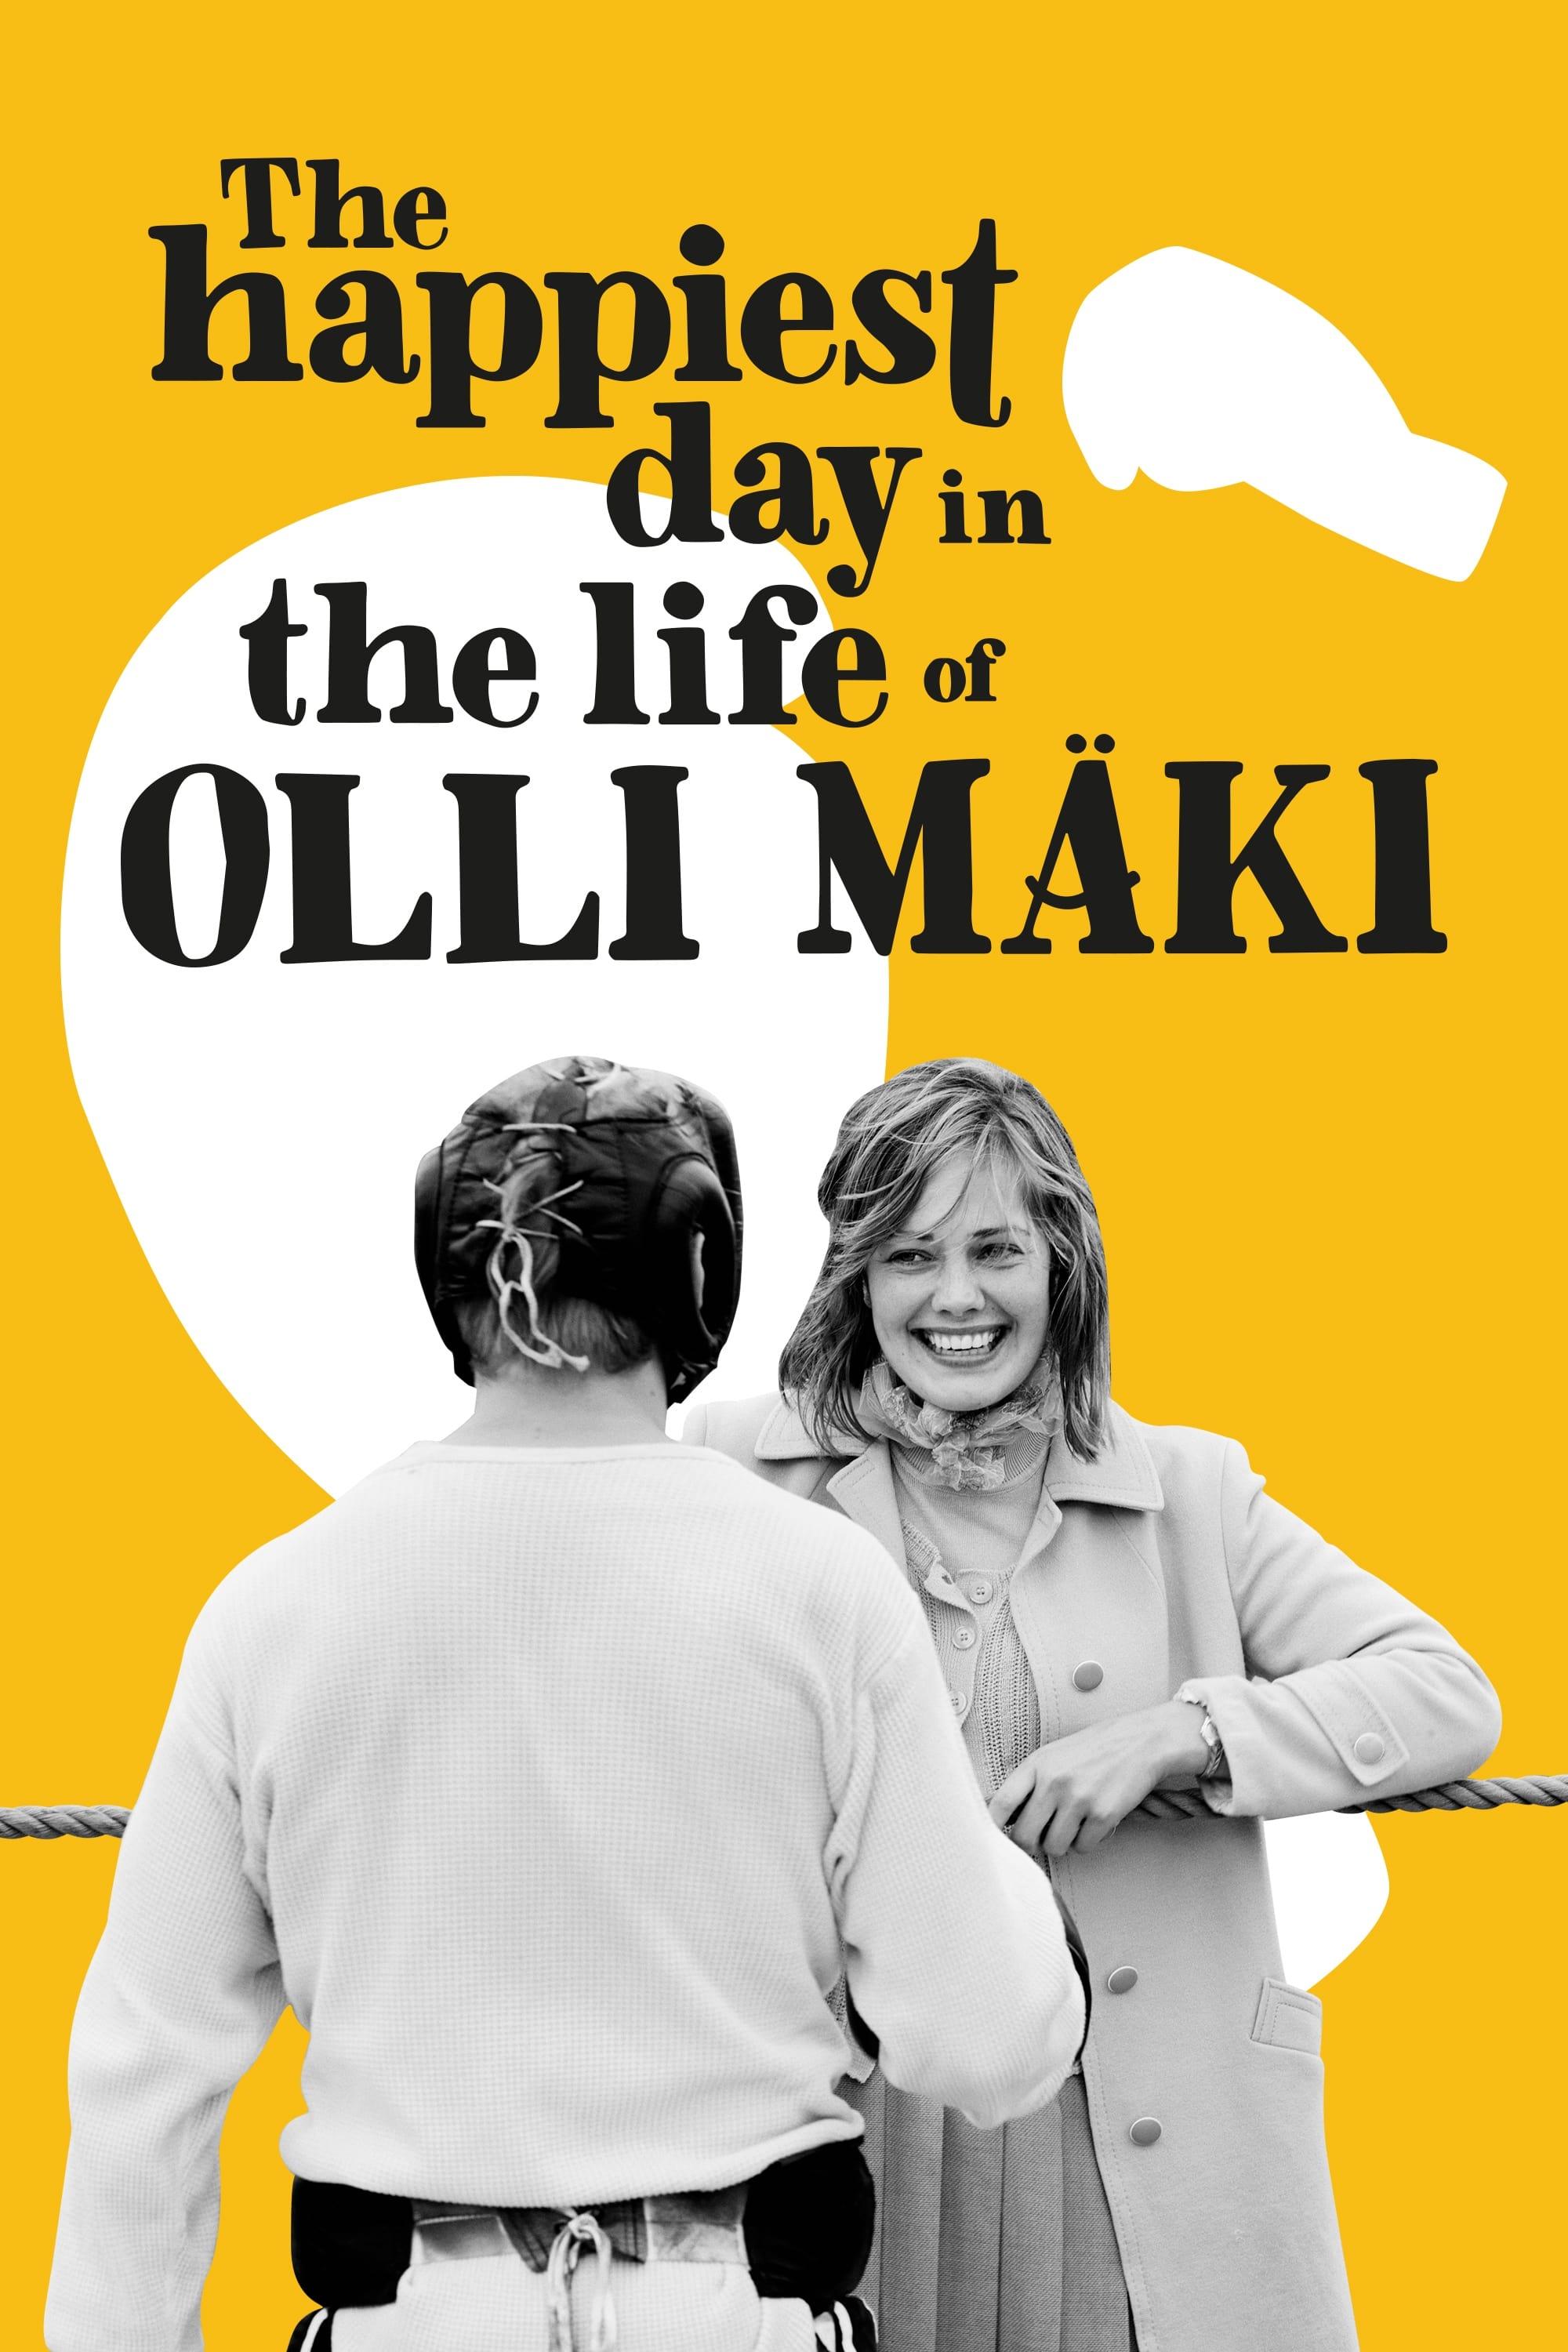 The Happiest Day in the Life of Olli Mäki poster